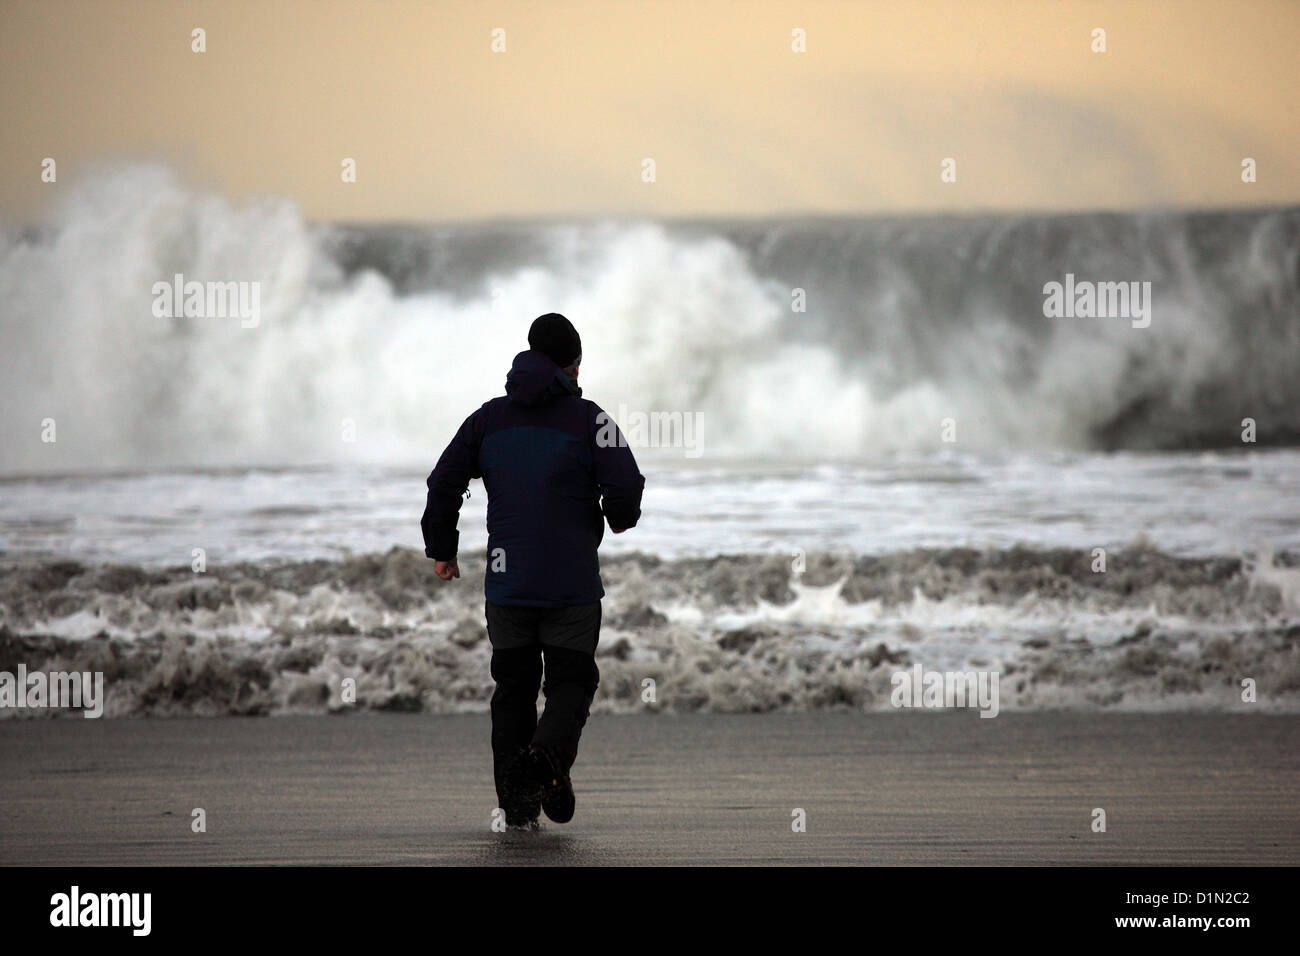 Isle of Mull, UK. Sunday 30 December 2012 - Man watches huge waves pounding the coastline on the Isle of Mull in the west coast of Scotland as winds gusting in excess of 50 miles per hour reach land Stock Photo